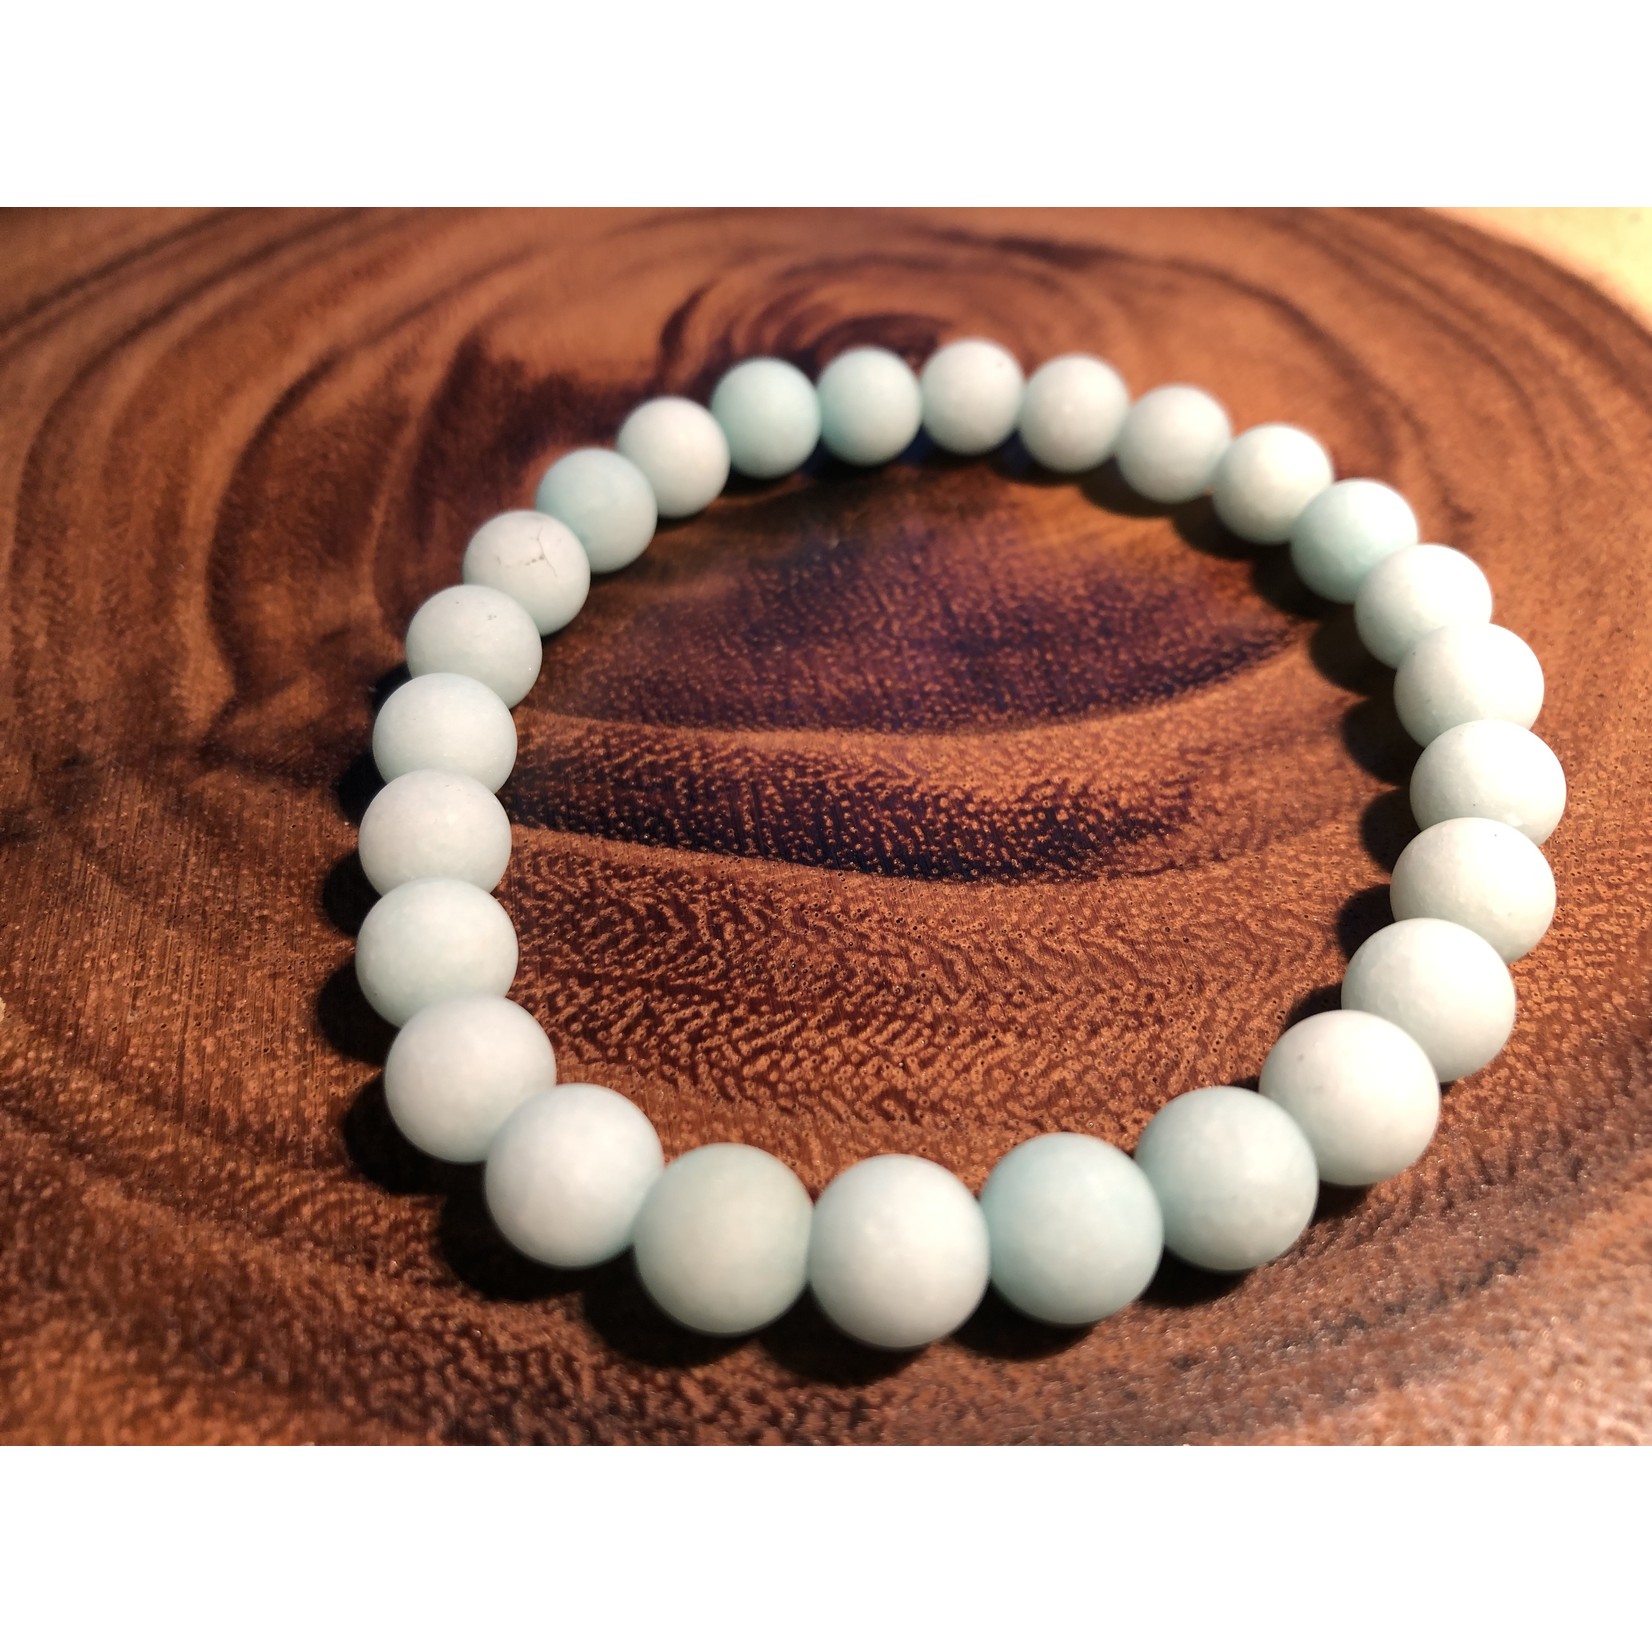 21cm Natural Stone and Wood Bracelets - A Blend of Nature and Elegance